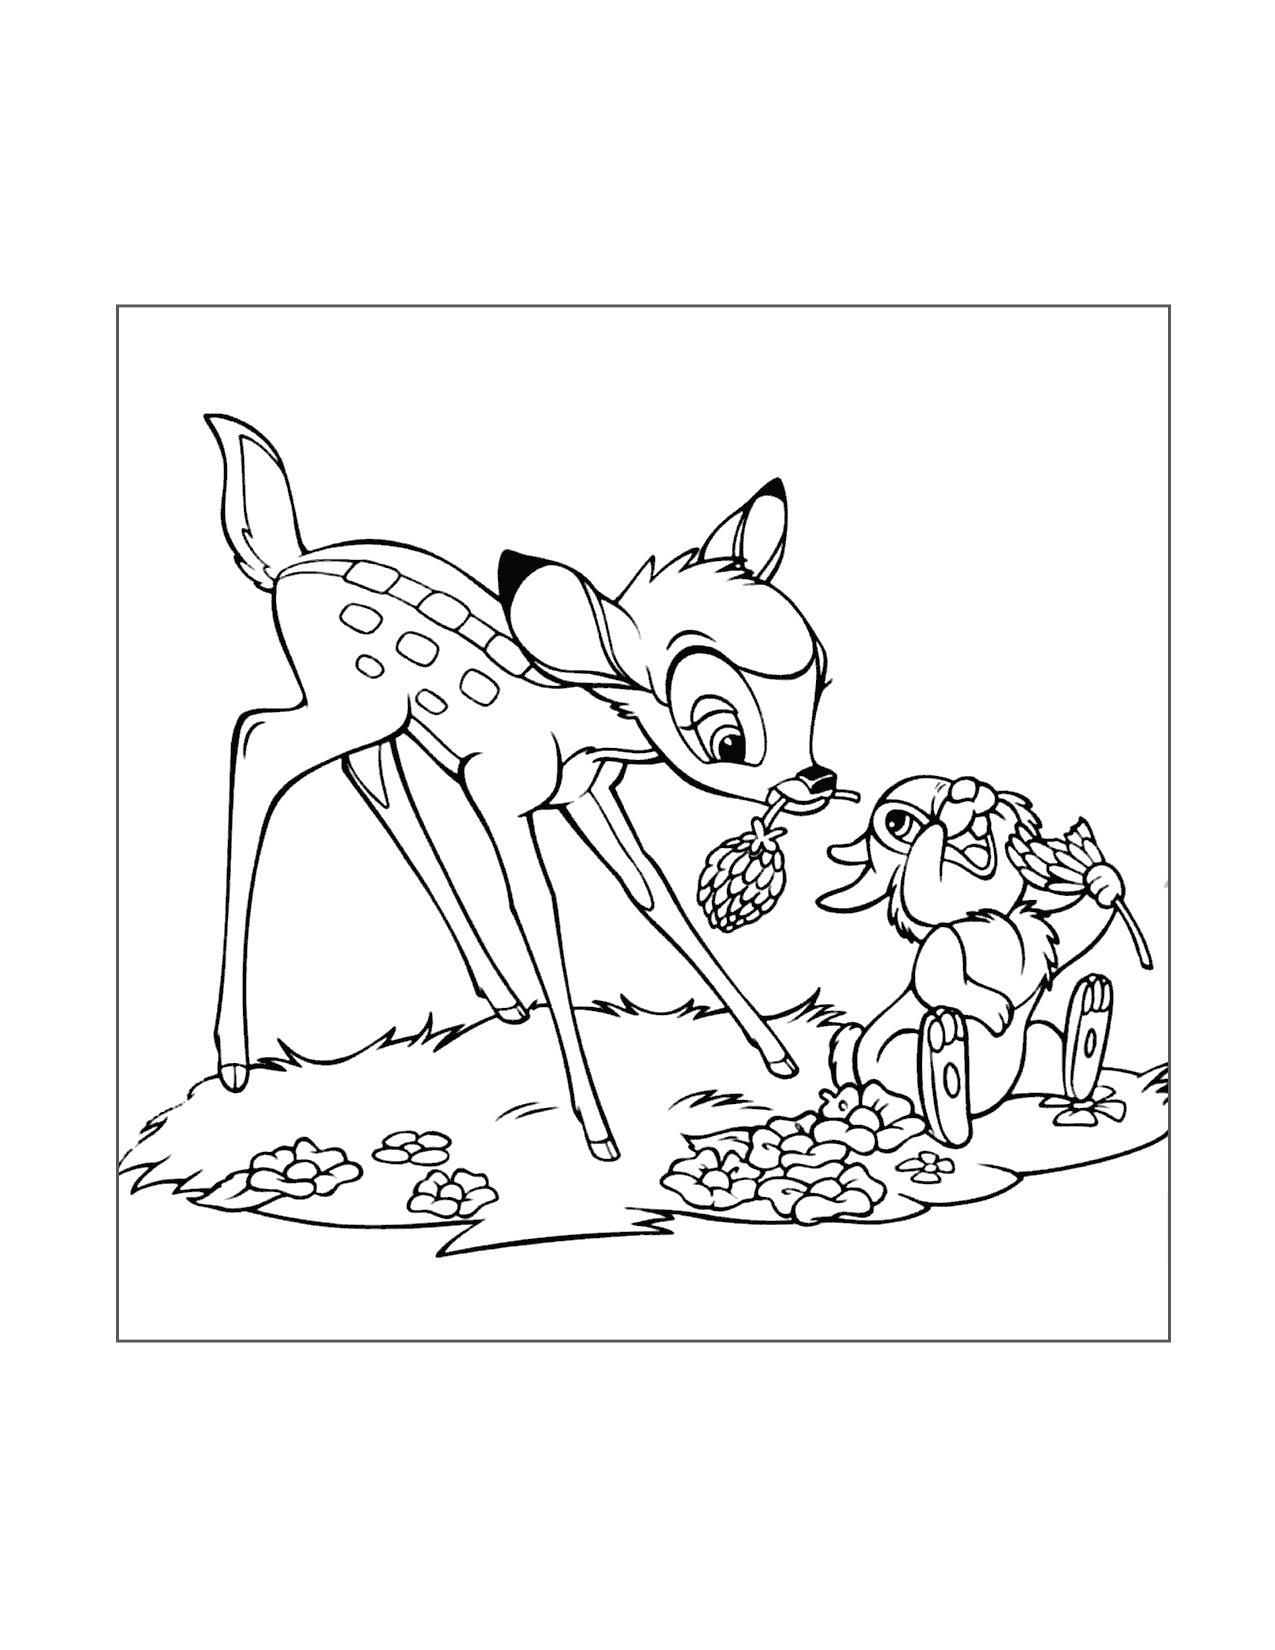 Bambi And Thumper Eat Clover Coloring Page